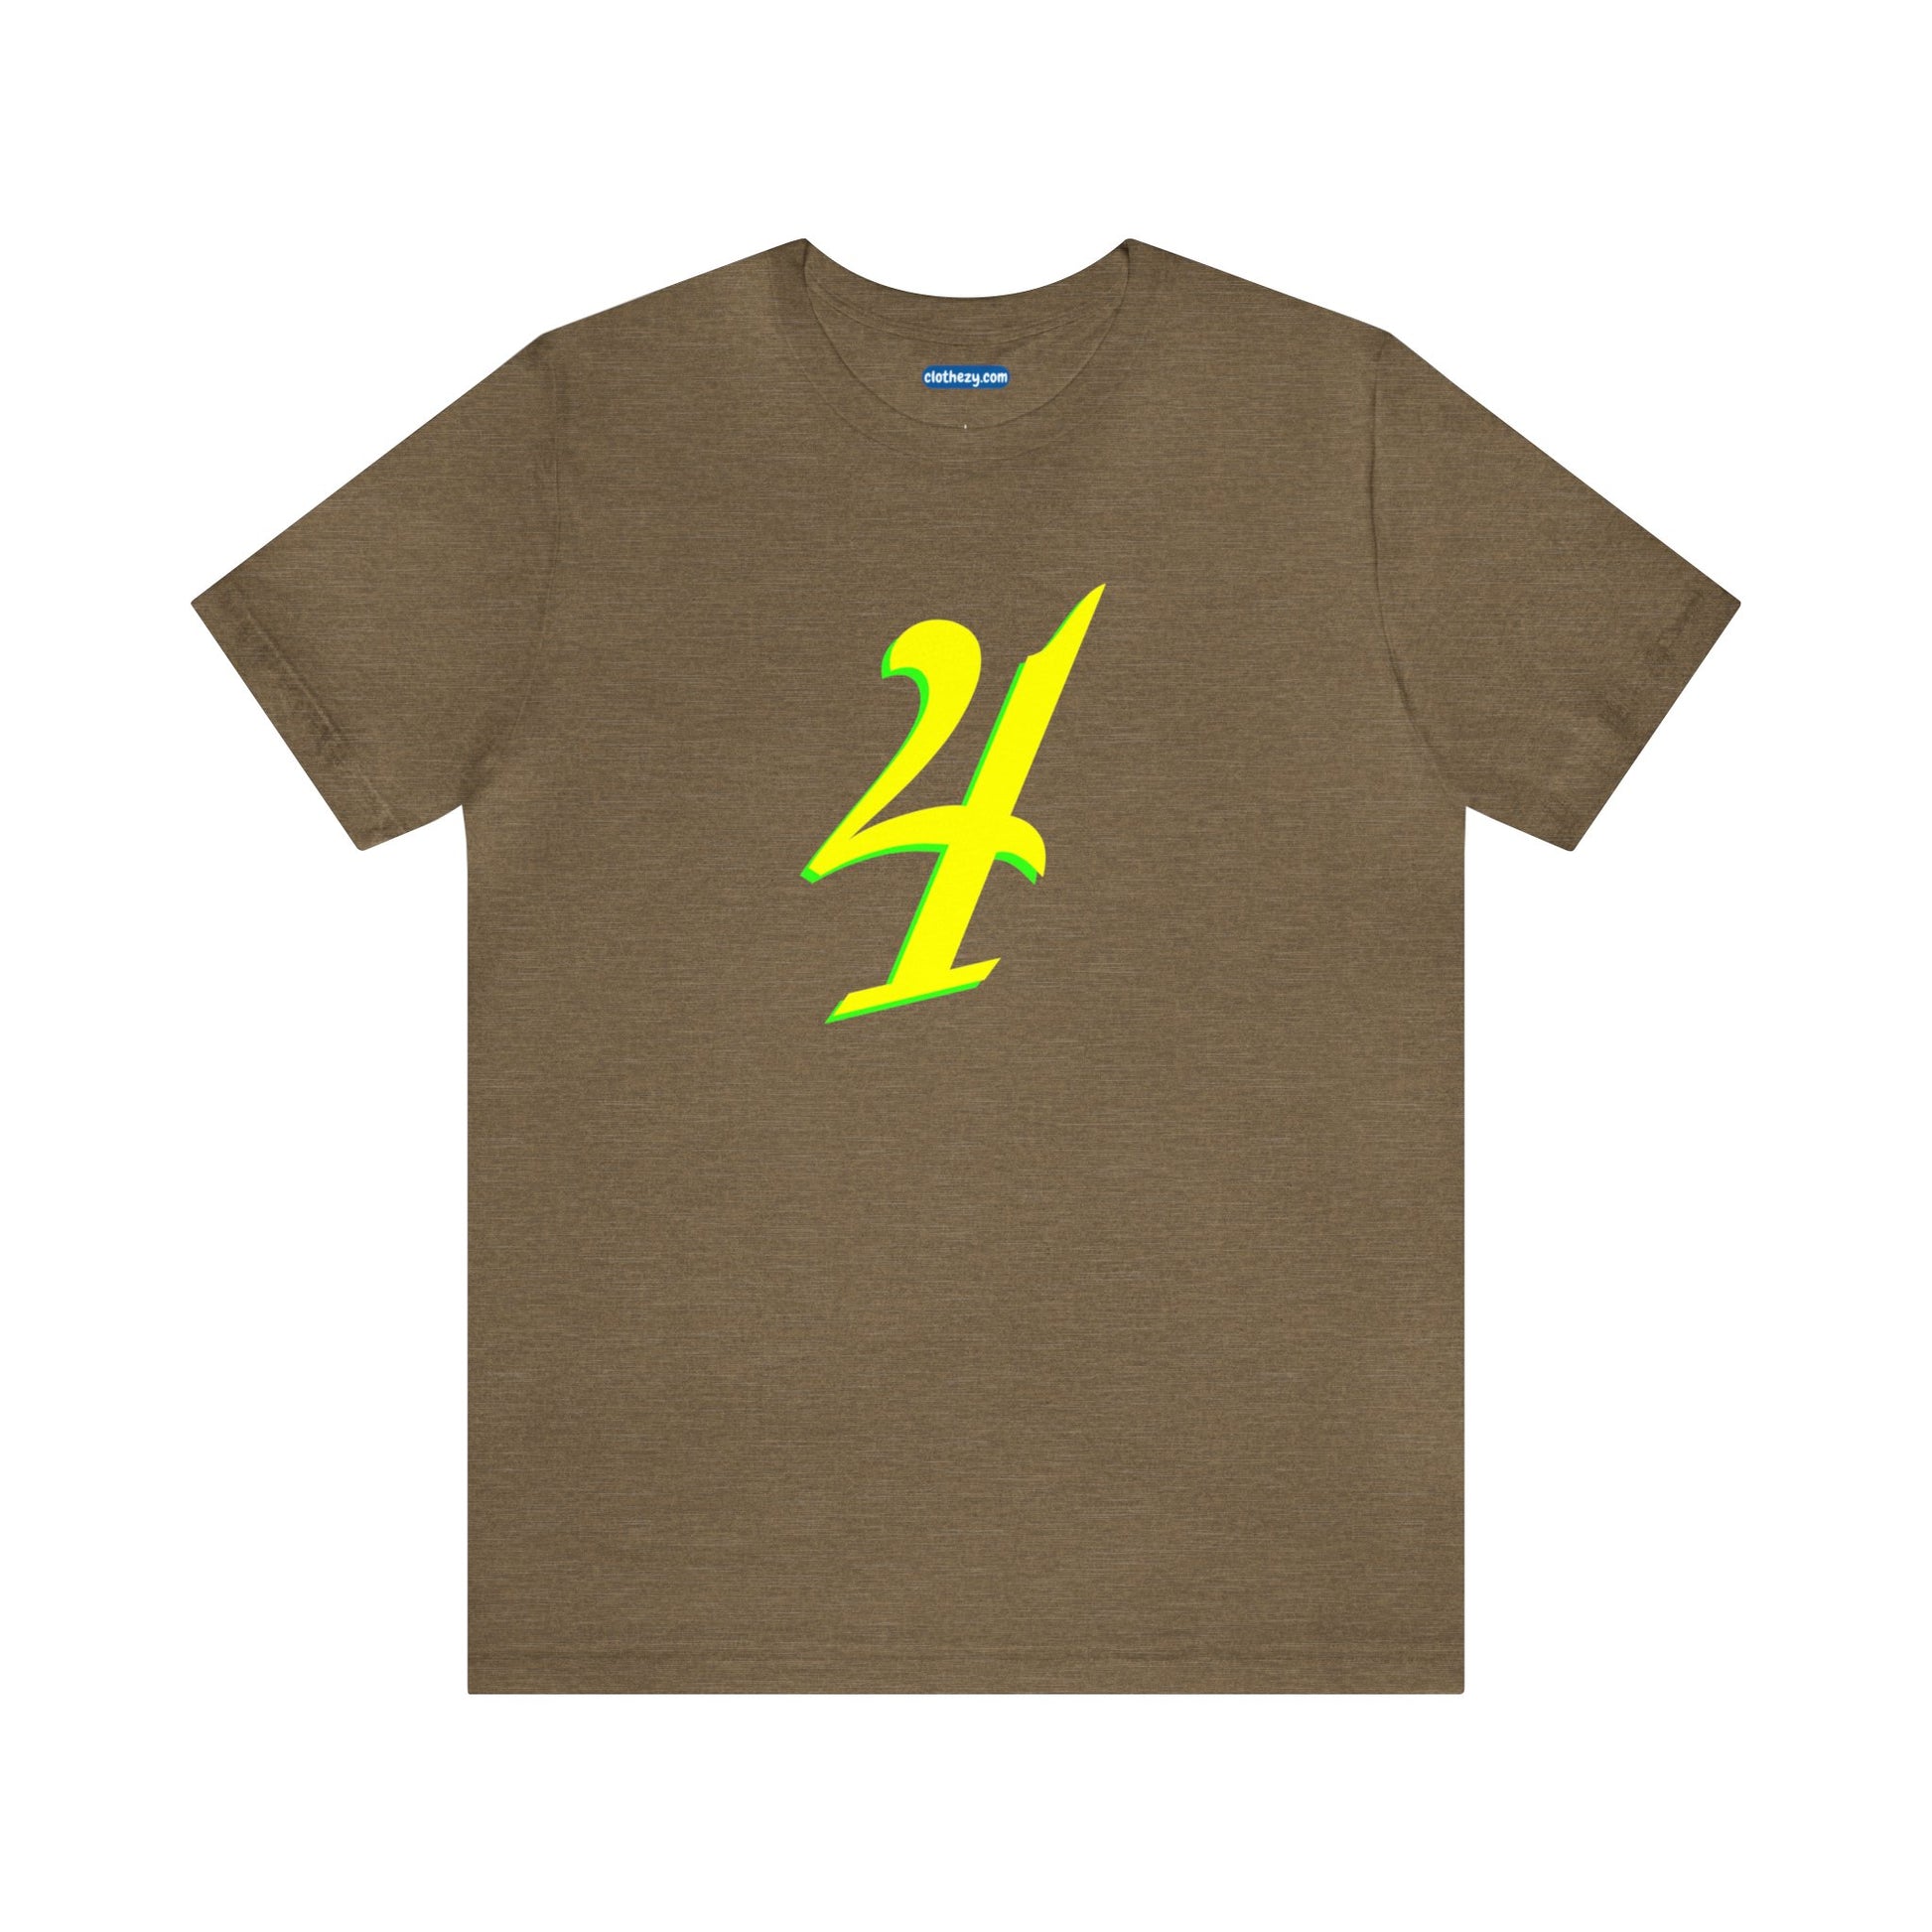 Number 4 Design - Soft Cotton Tee for birthdays and celebrations, Gift for friends and family, Multiple Options by clothezy.com in Olive Heather Size Small - Buy Now